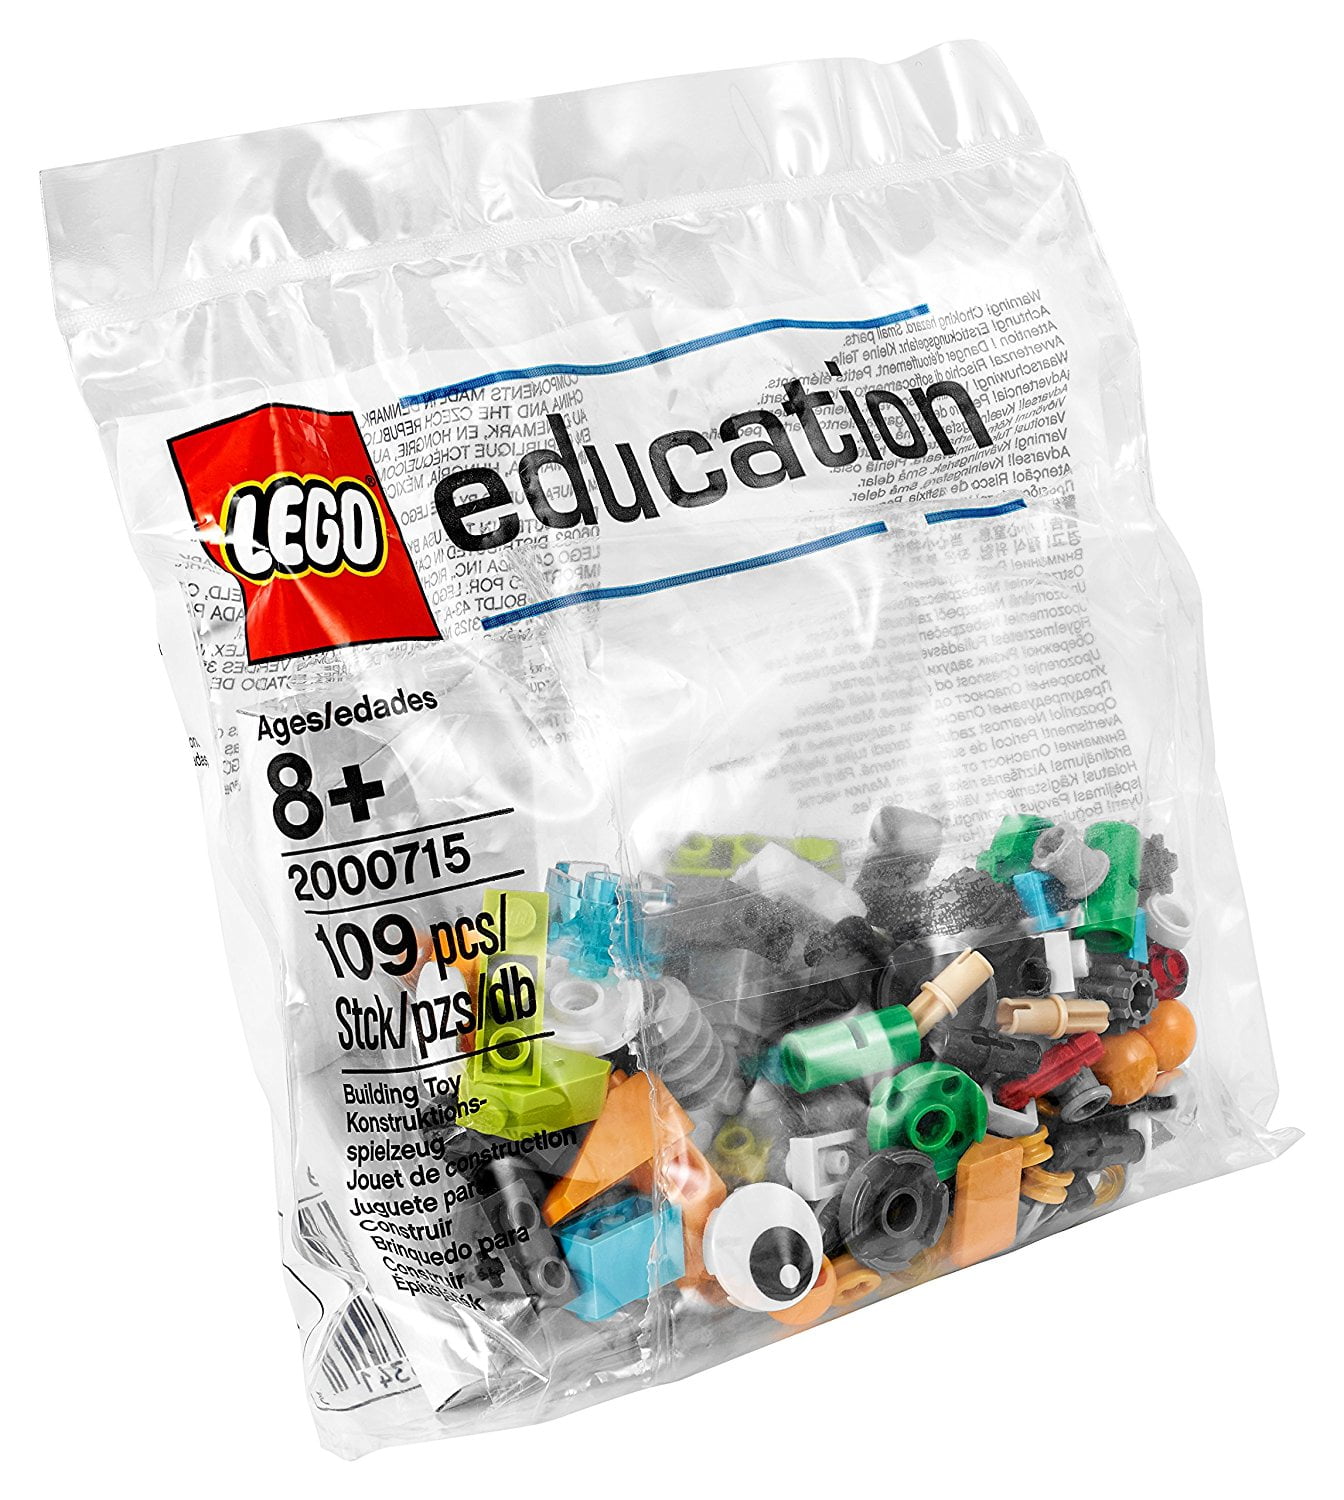 Lego Education 2.0 Replacement Pack - Walmart.com